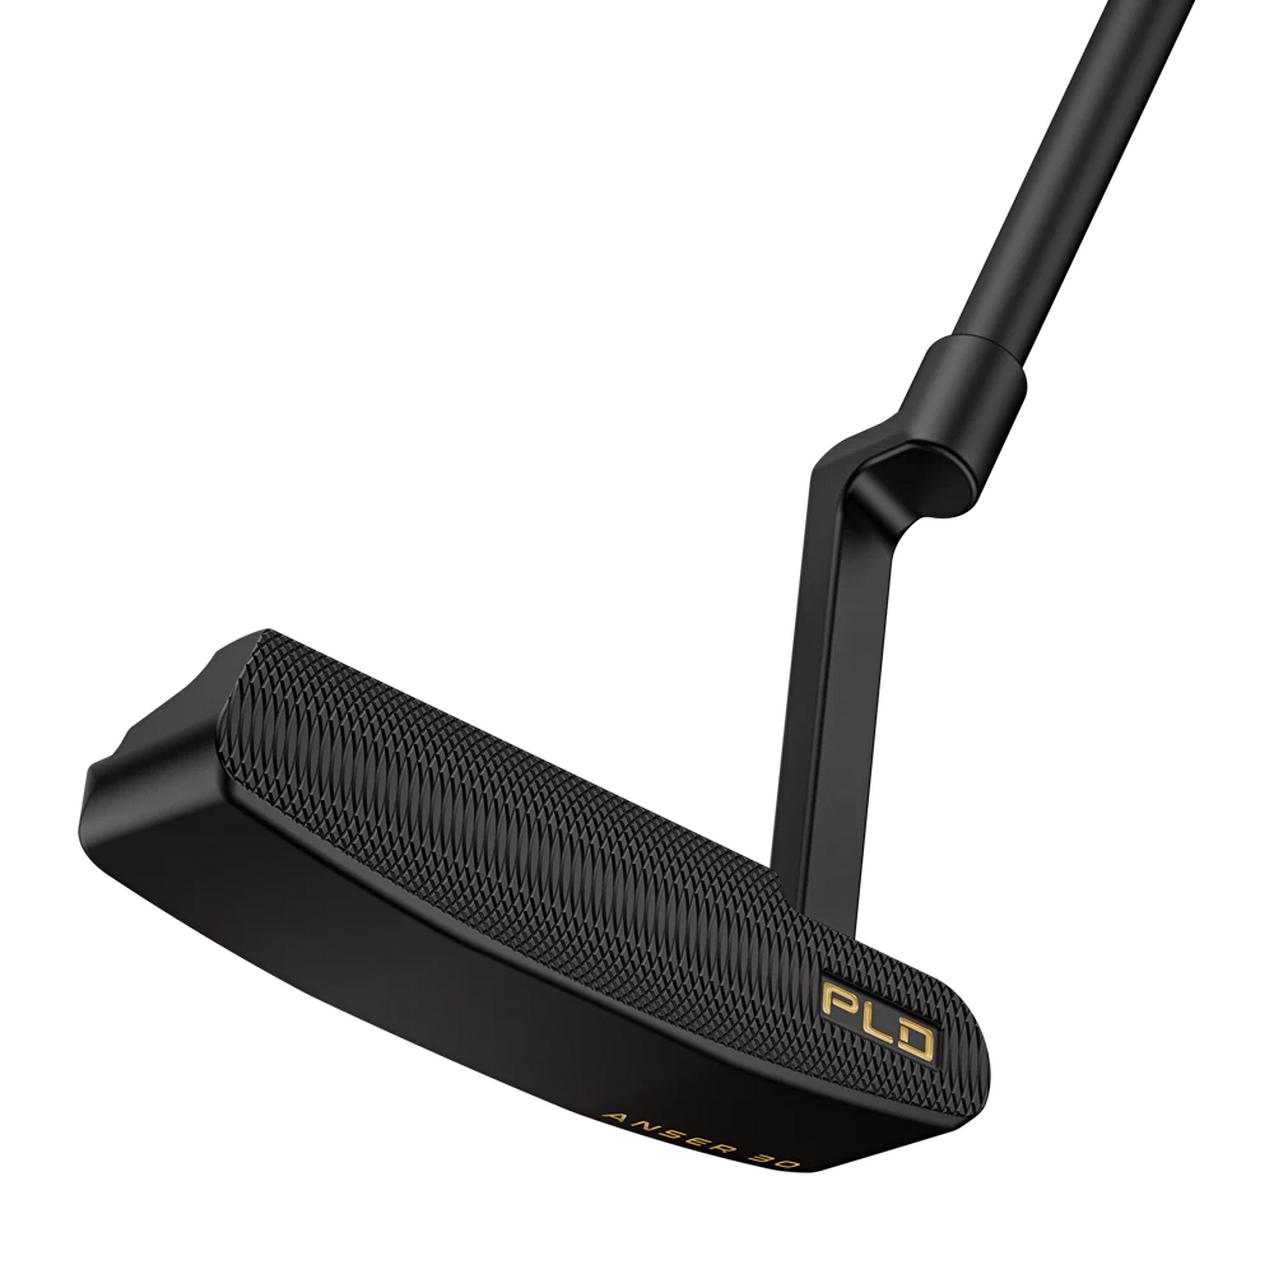 PING PLD Milled SE Anser 30 Putter with Graphite Shaft